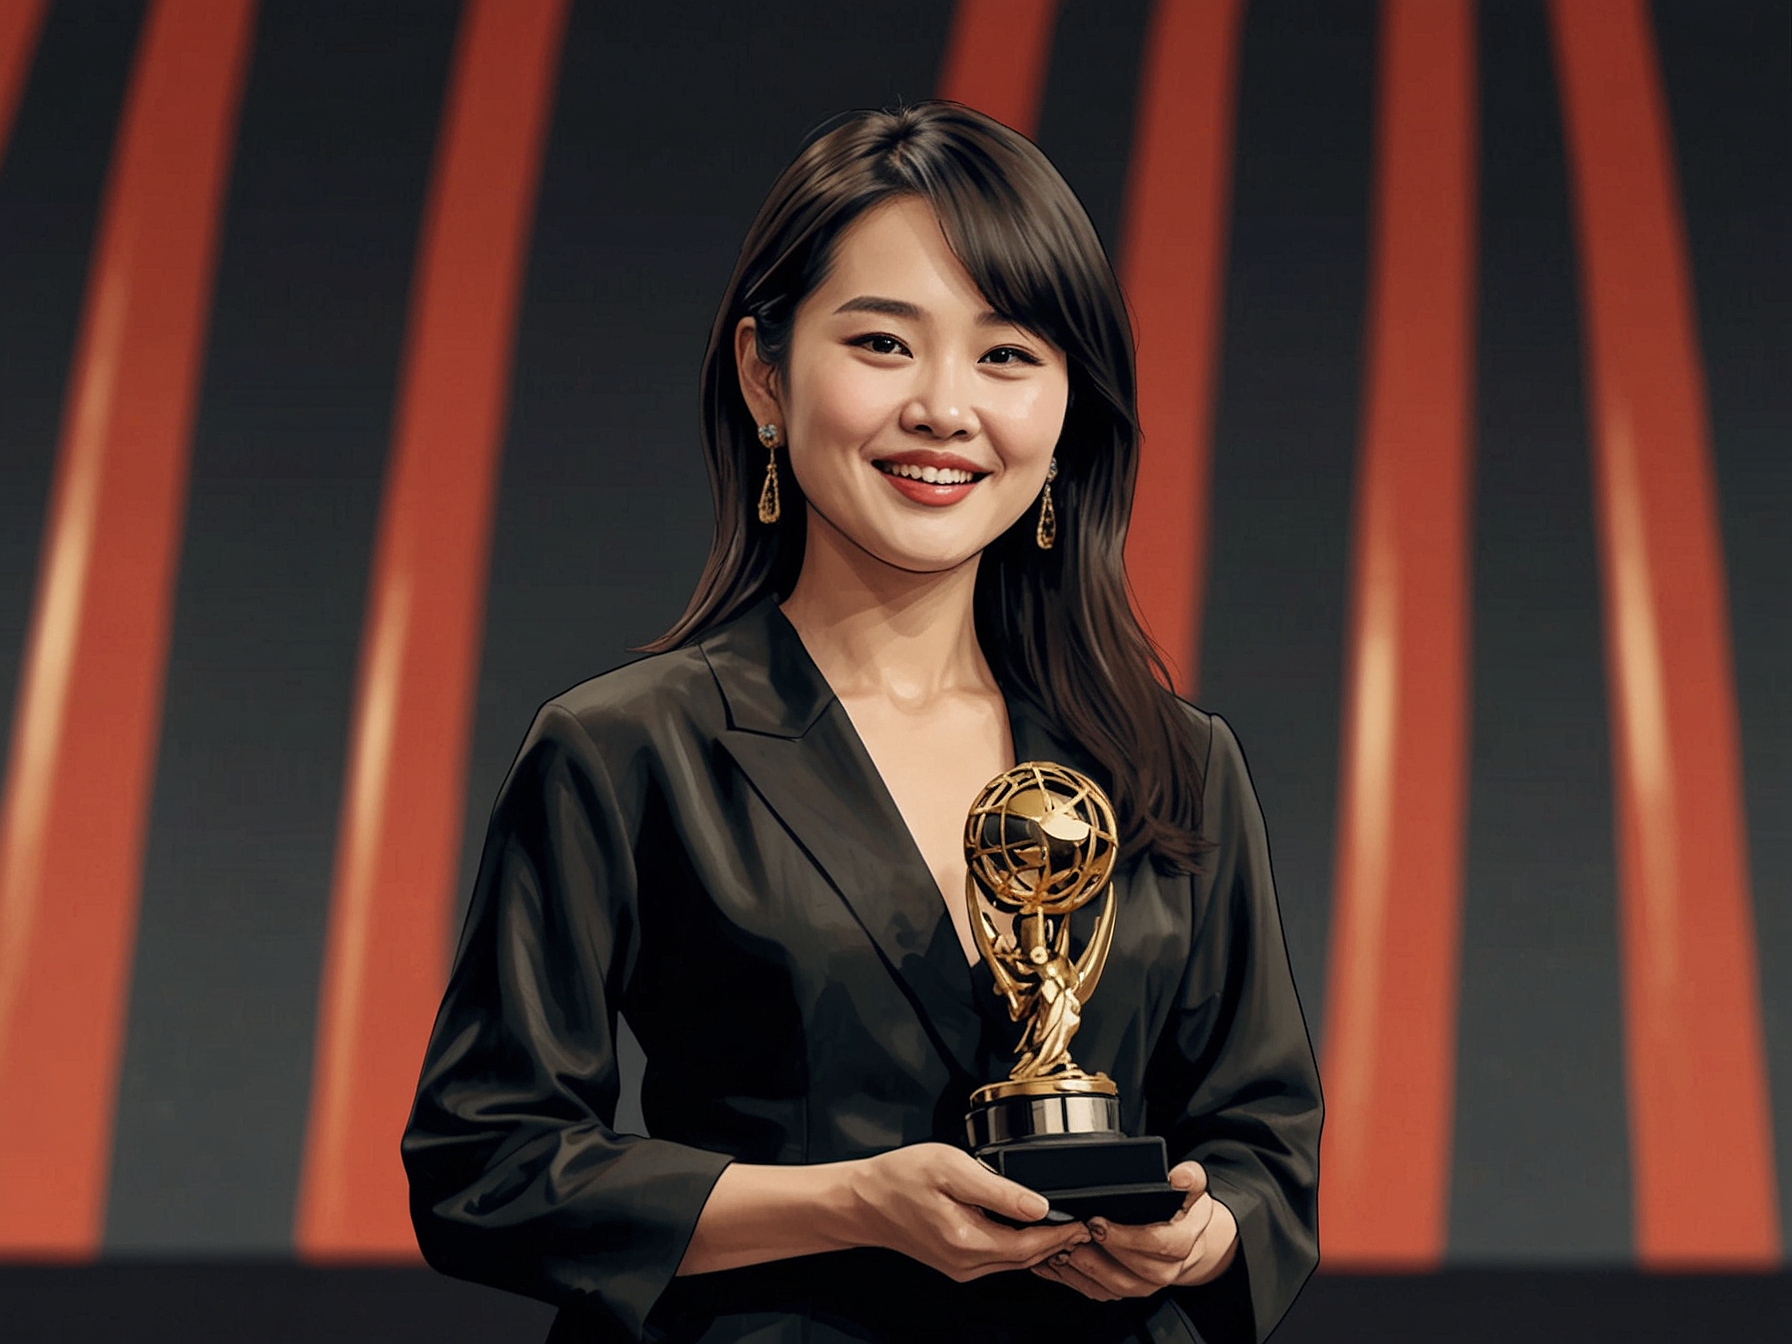 The director Zeng Zi receiving the best film award at the 26th Shanghai International Film Festival's Asian New Talent section, highlighting her achievement and the film's success.